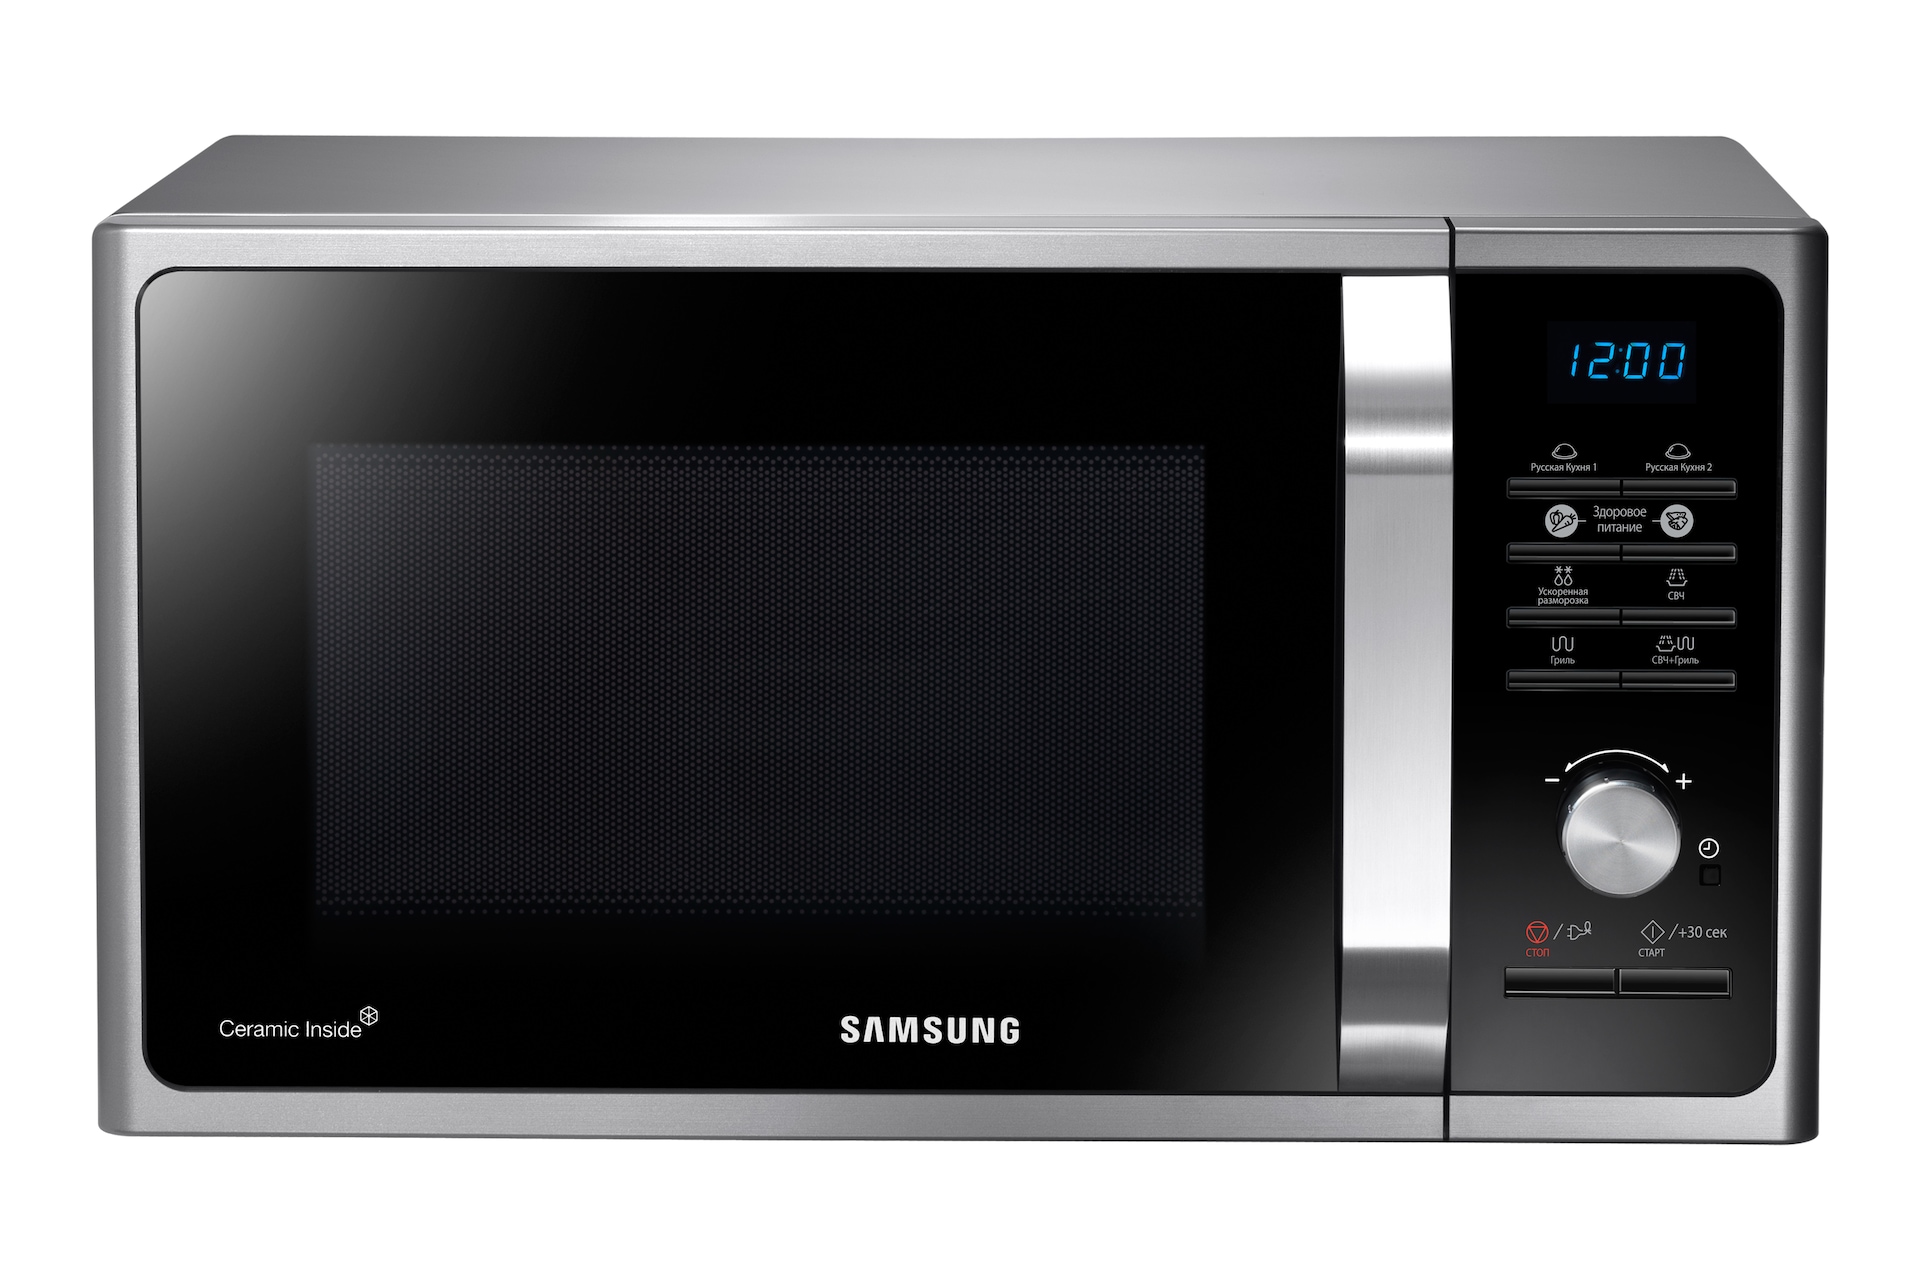 https://images.samsung.com/is/image/samsung/uk-microwave-oven-solo-ms23f301tas-ms23f301tas-eu-silver-Silver-166179082?$650_519_PNG$